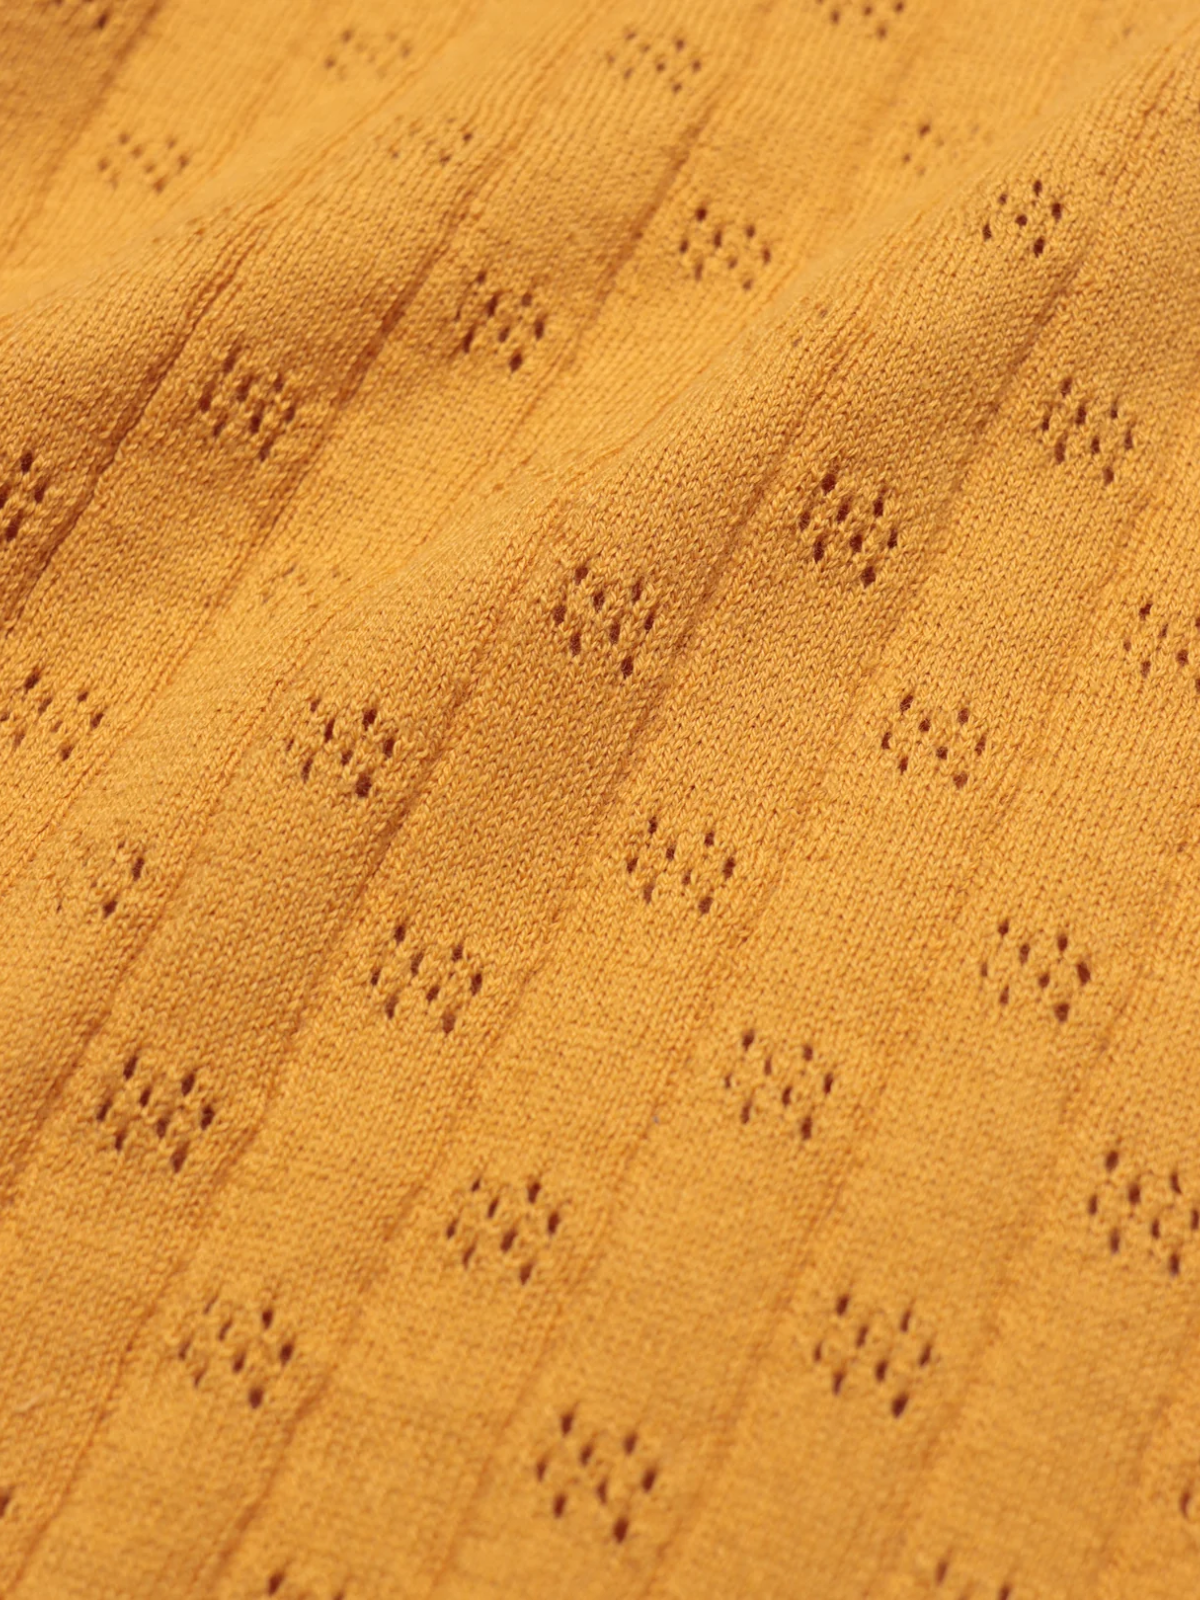 far afield jacobs polo ss short sleeve perforated lace design 100% bci organic cotton honey gold yellow knit sweater polo kempt athens ga georgia men's clothing store